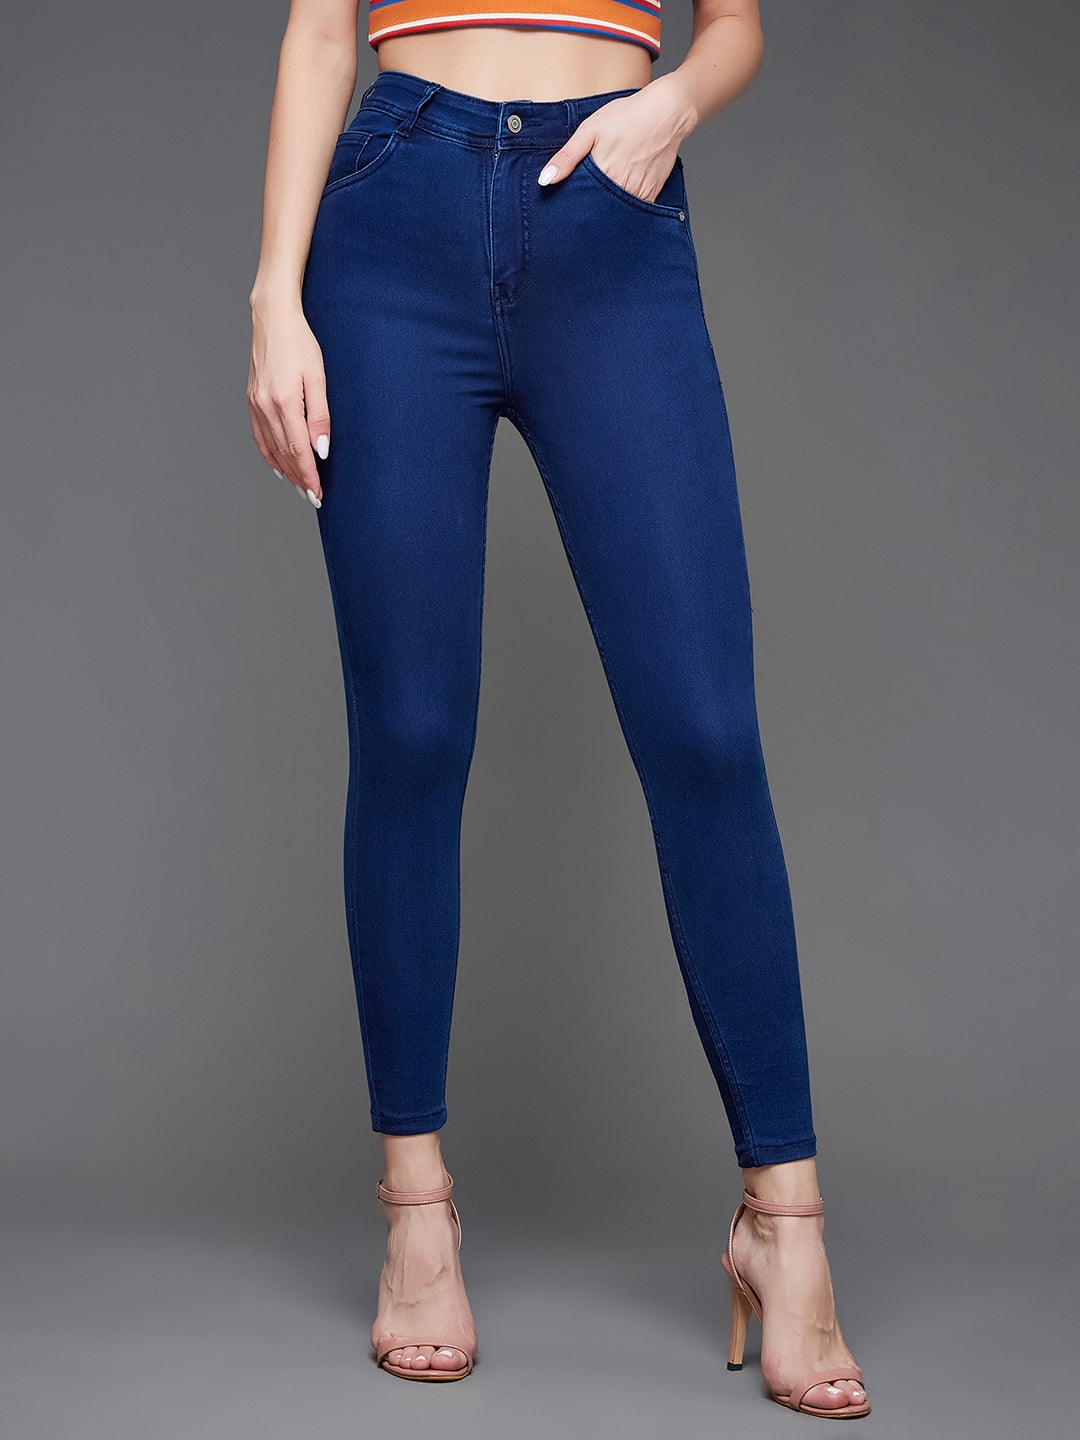 Navy Blue Skinny Fit High Rise Clean Look Cropped Length Stretchable Denim Jeans